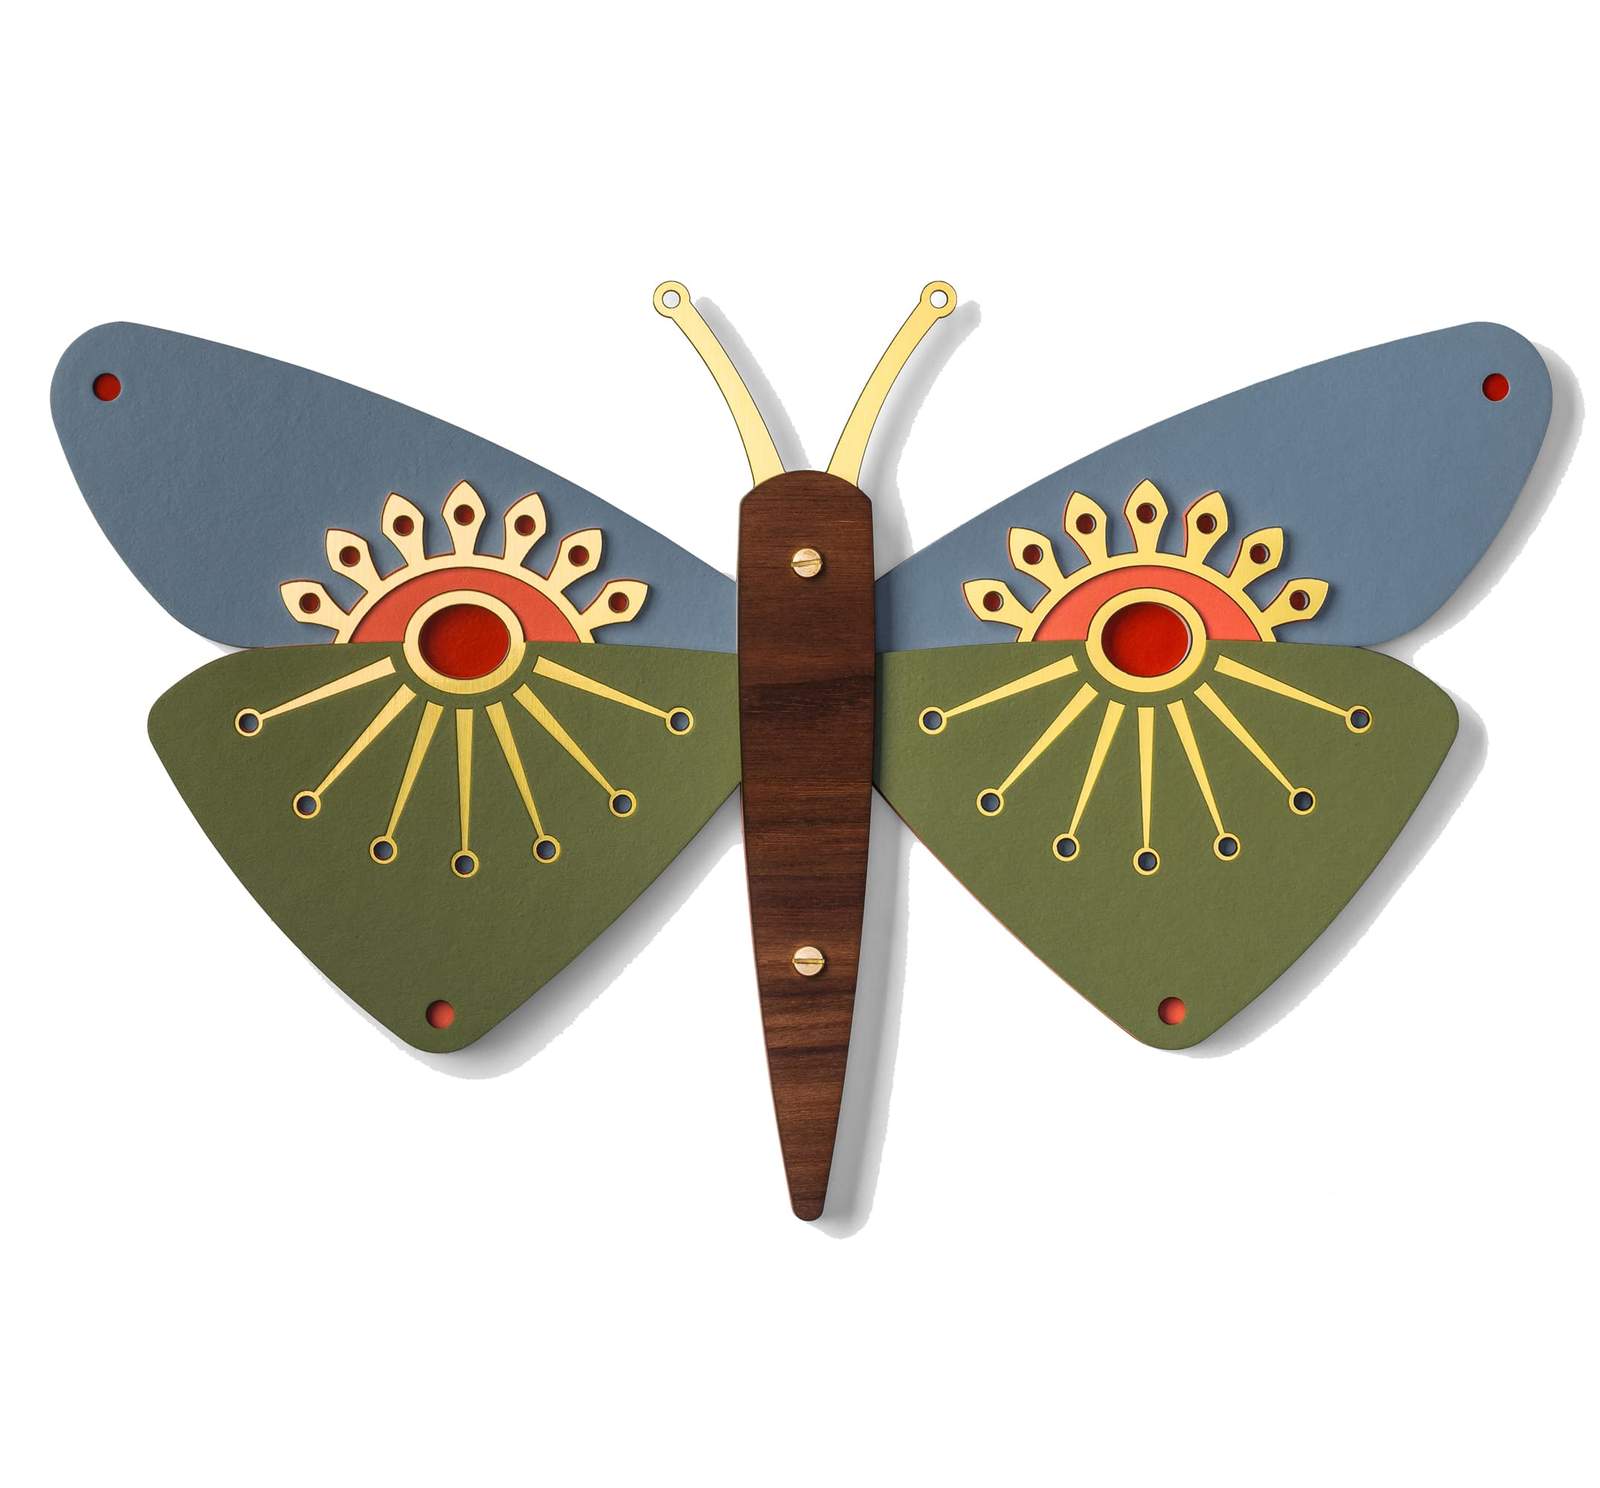 Swallowtail butterfly wall hanging is a perfect addition to any room